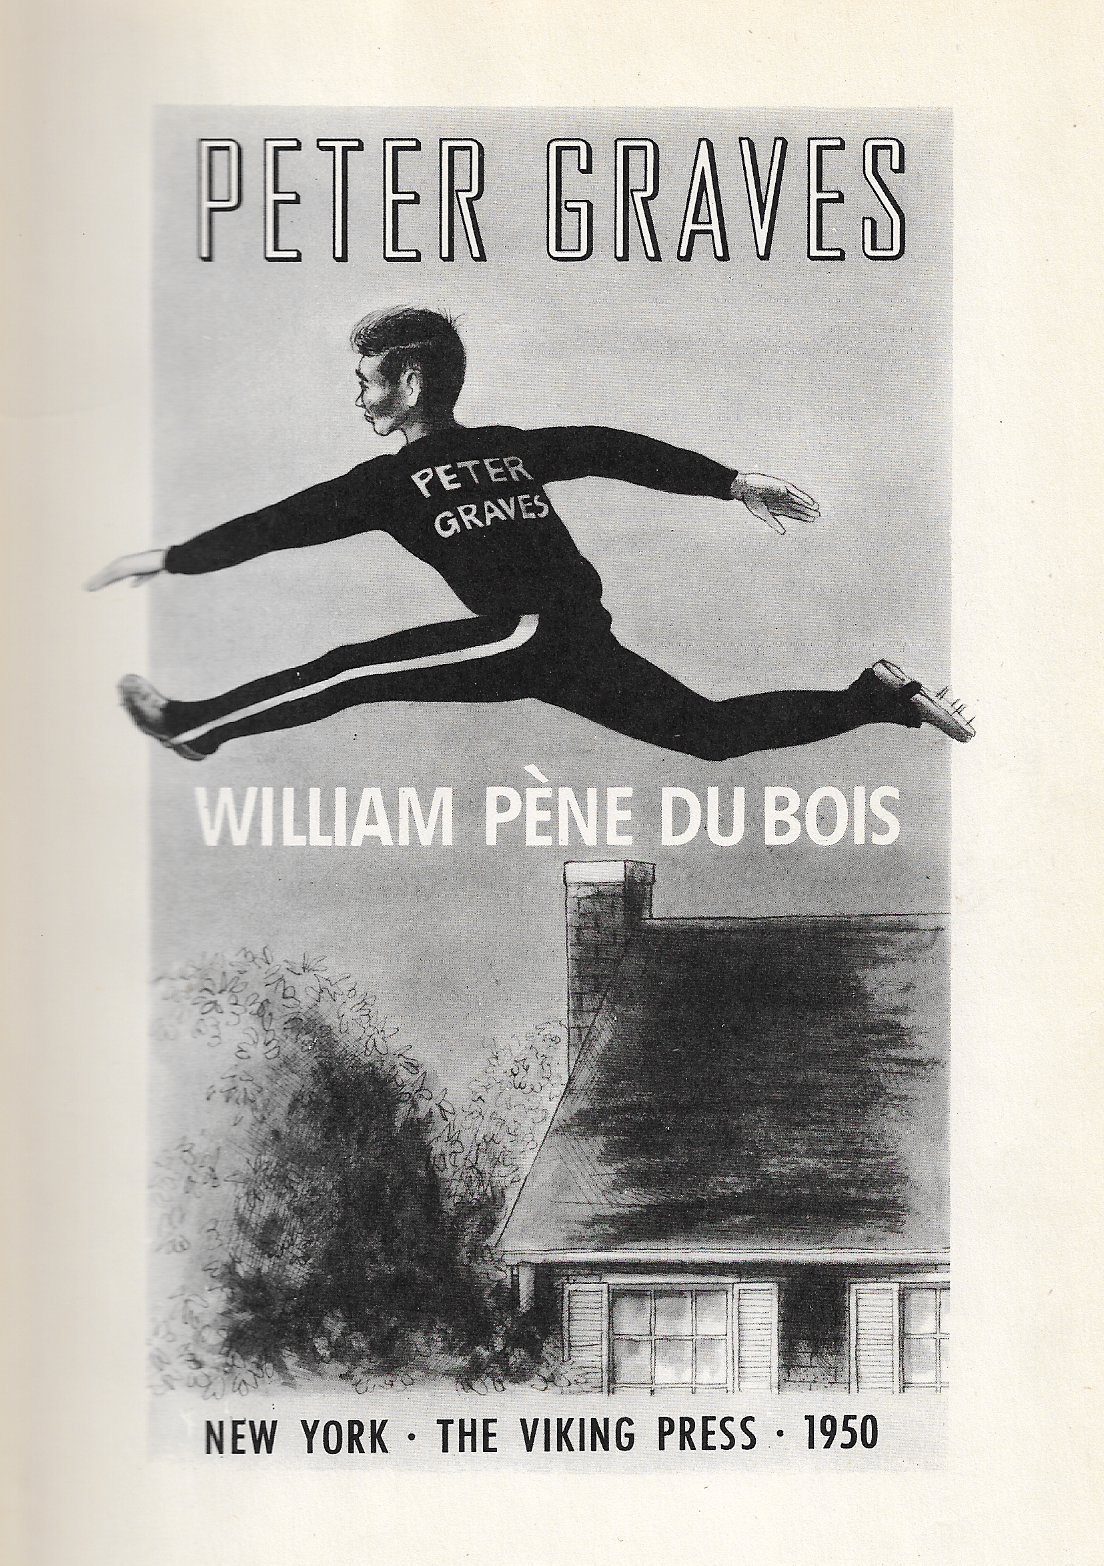 frontispiece of “Peter Graves”